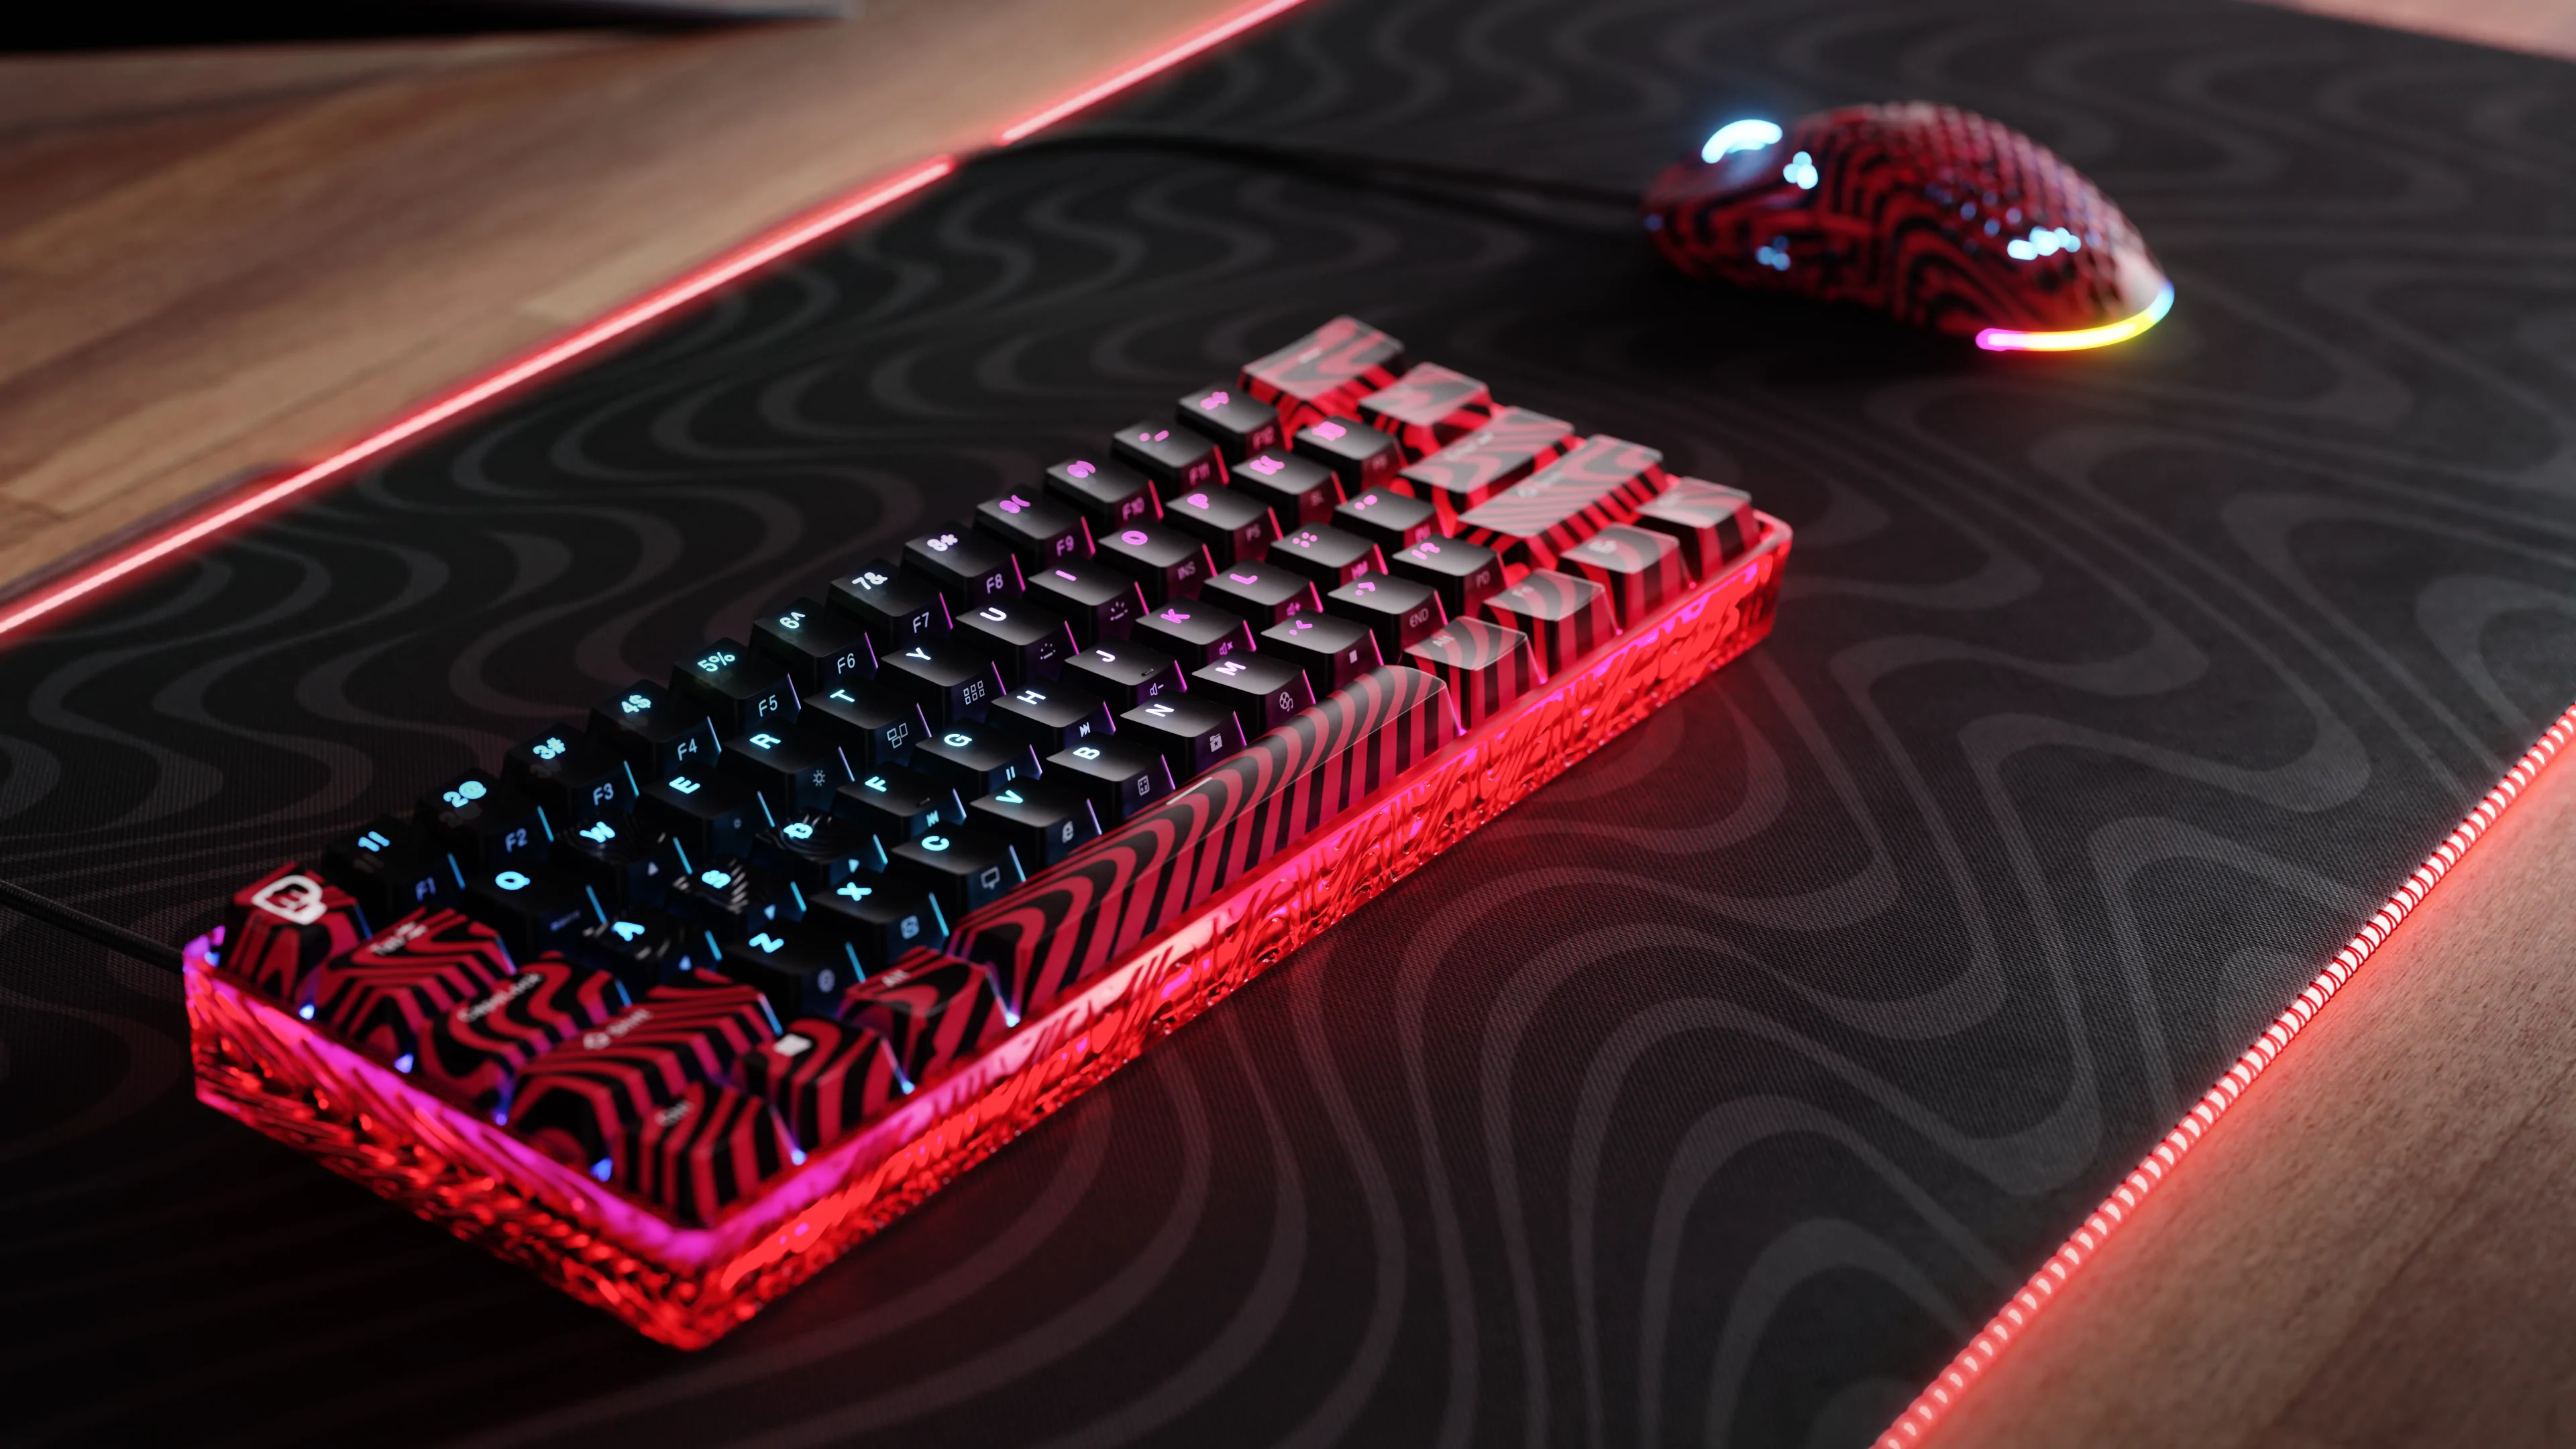 Pewdiepie mouse and keyboard Combo